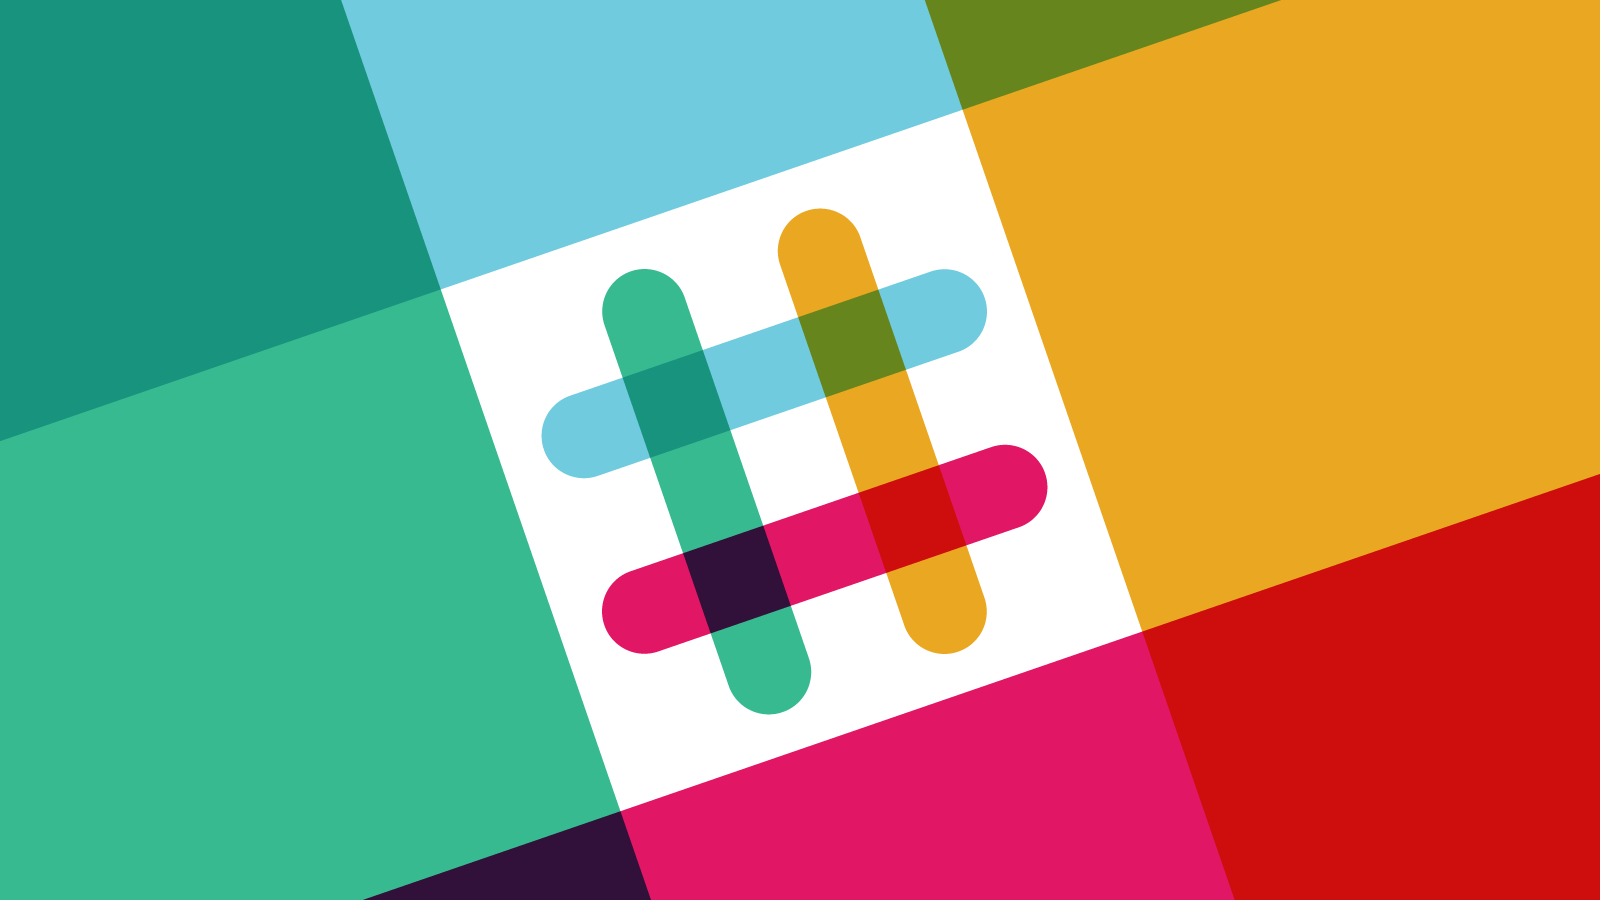 Slack App Logo - Everything You Need to Know About Slack